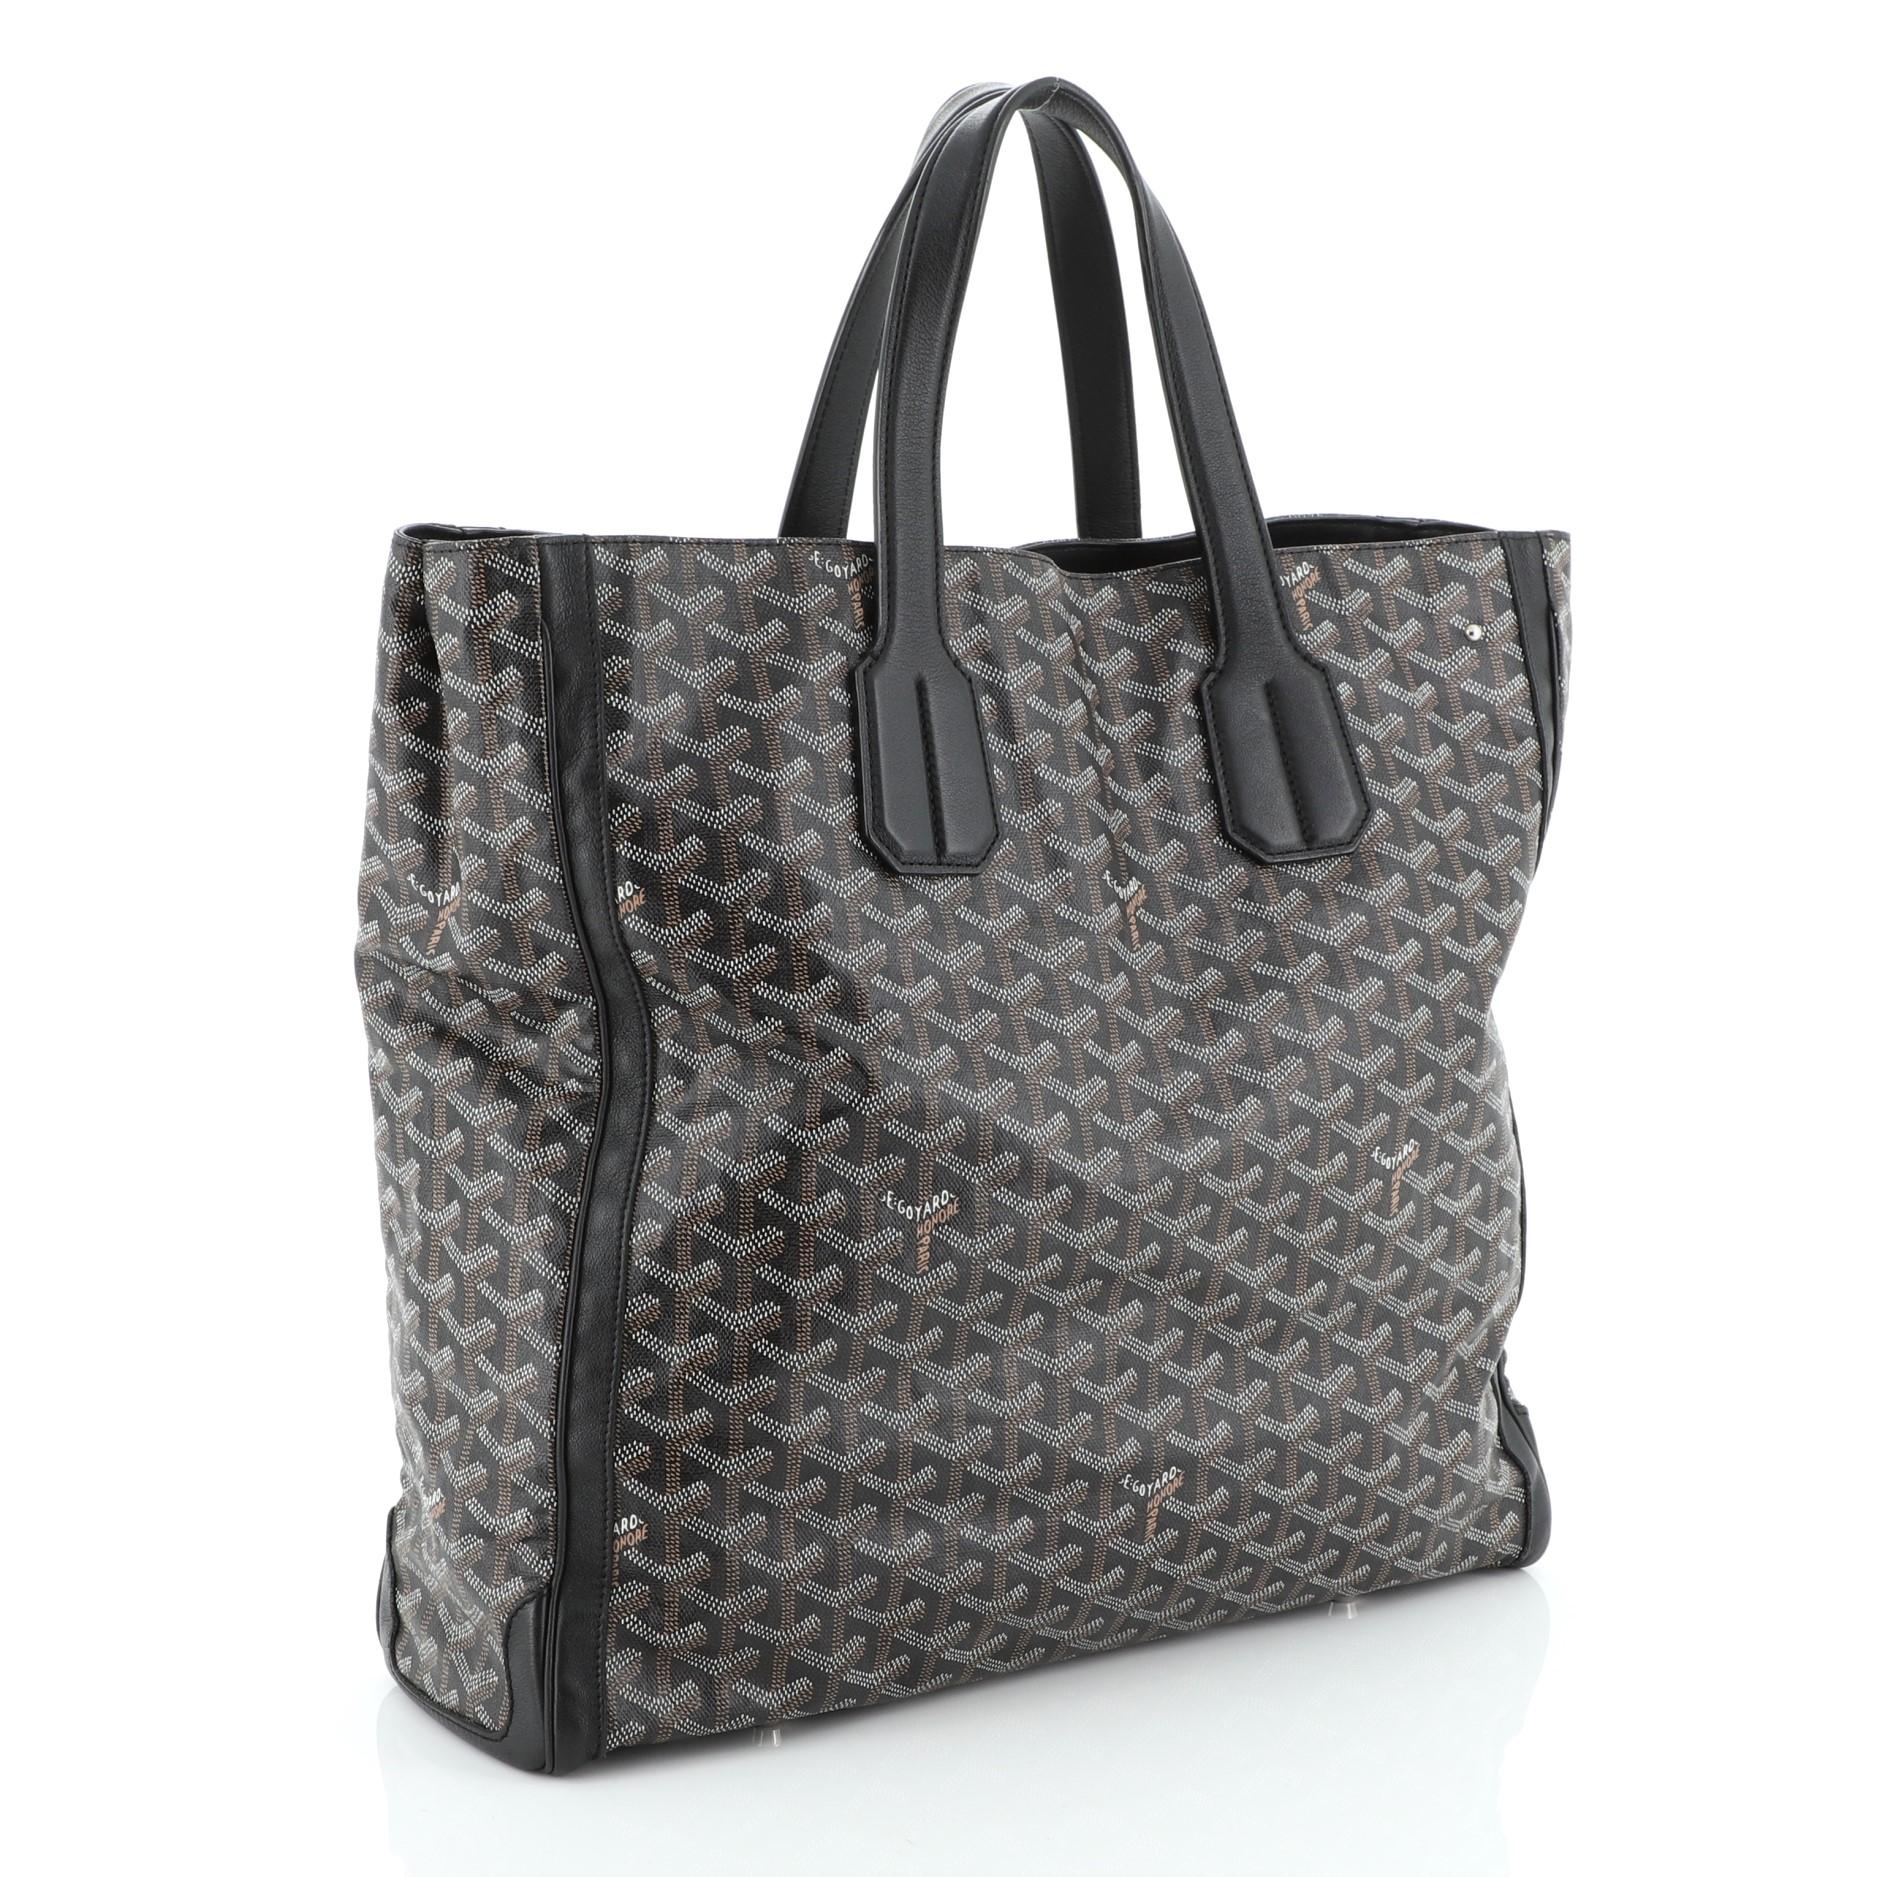 This Goyard Voltaire Convertible Tote Coated Canvas, crafted from black coated canvas, features dual flat handles, protective base studs, and silver-tone hardware. Its open top with middle hook closure opens to a yellow fabric interior with slip